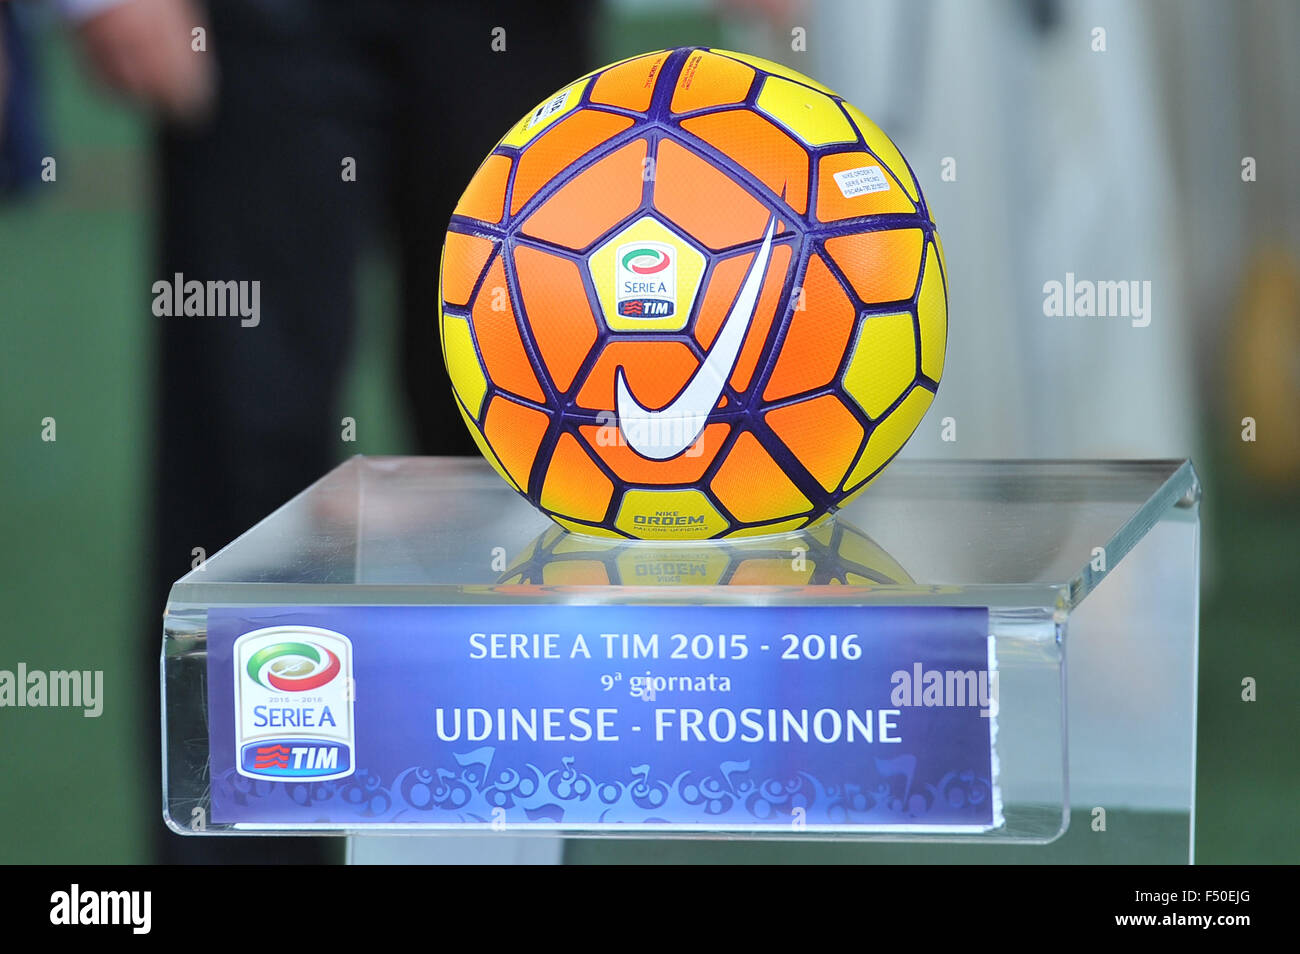 Udine, Italy. 25th October, 2015. The new Nike Ordem 3 Hi-Vis official  winter balls of Italian football series A prior the Italian Serie A TIM  football match between Udinese Calcio and Frosinone